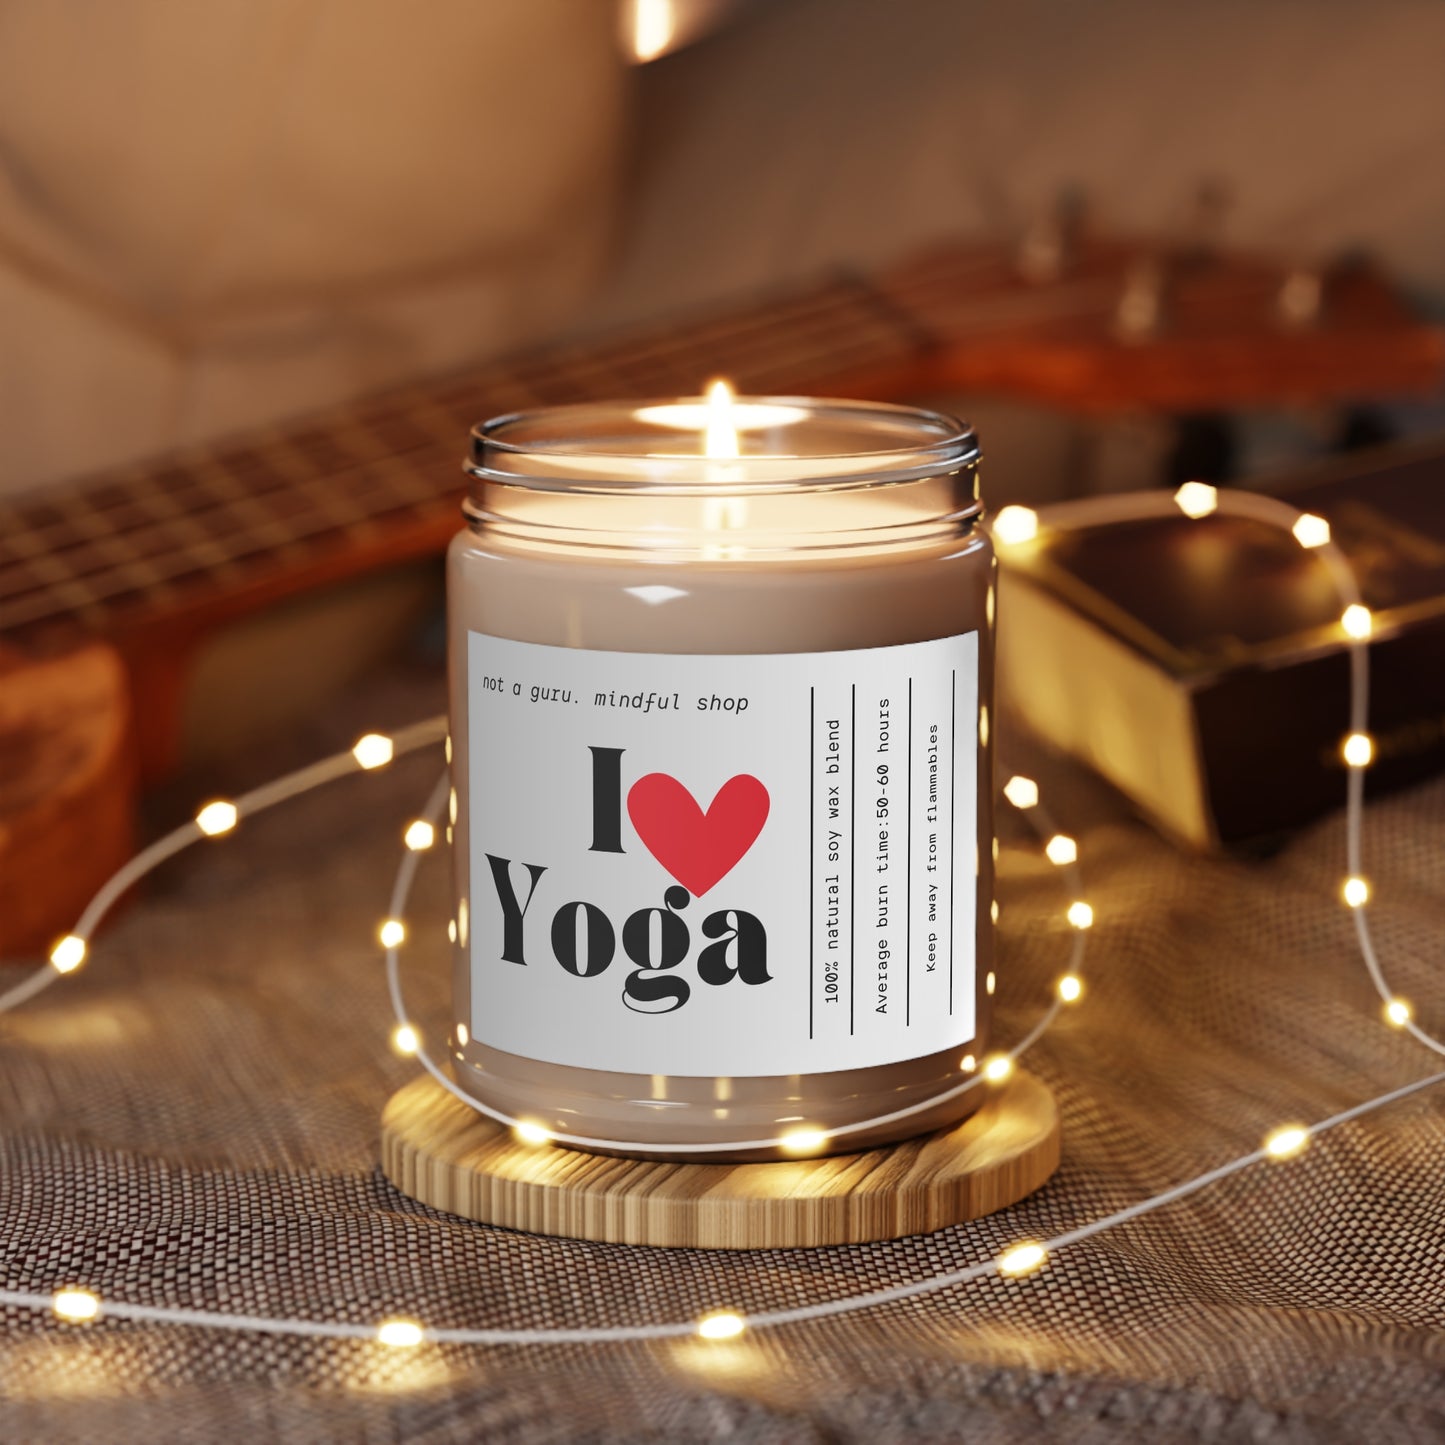 I LOVE Yoga Scented Candles